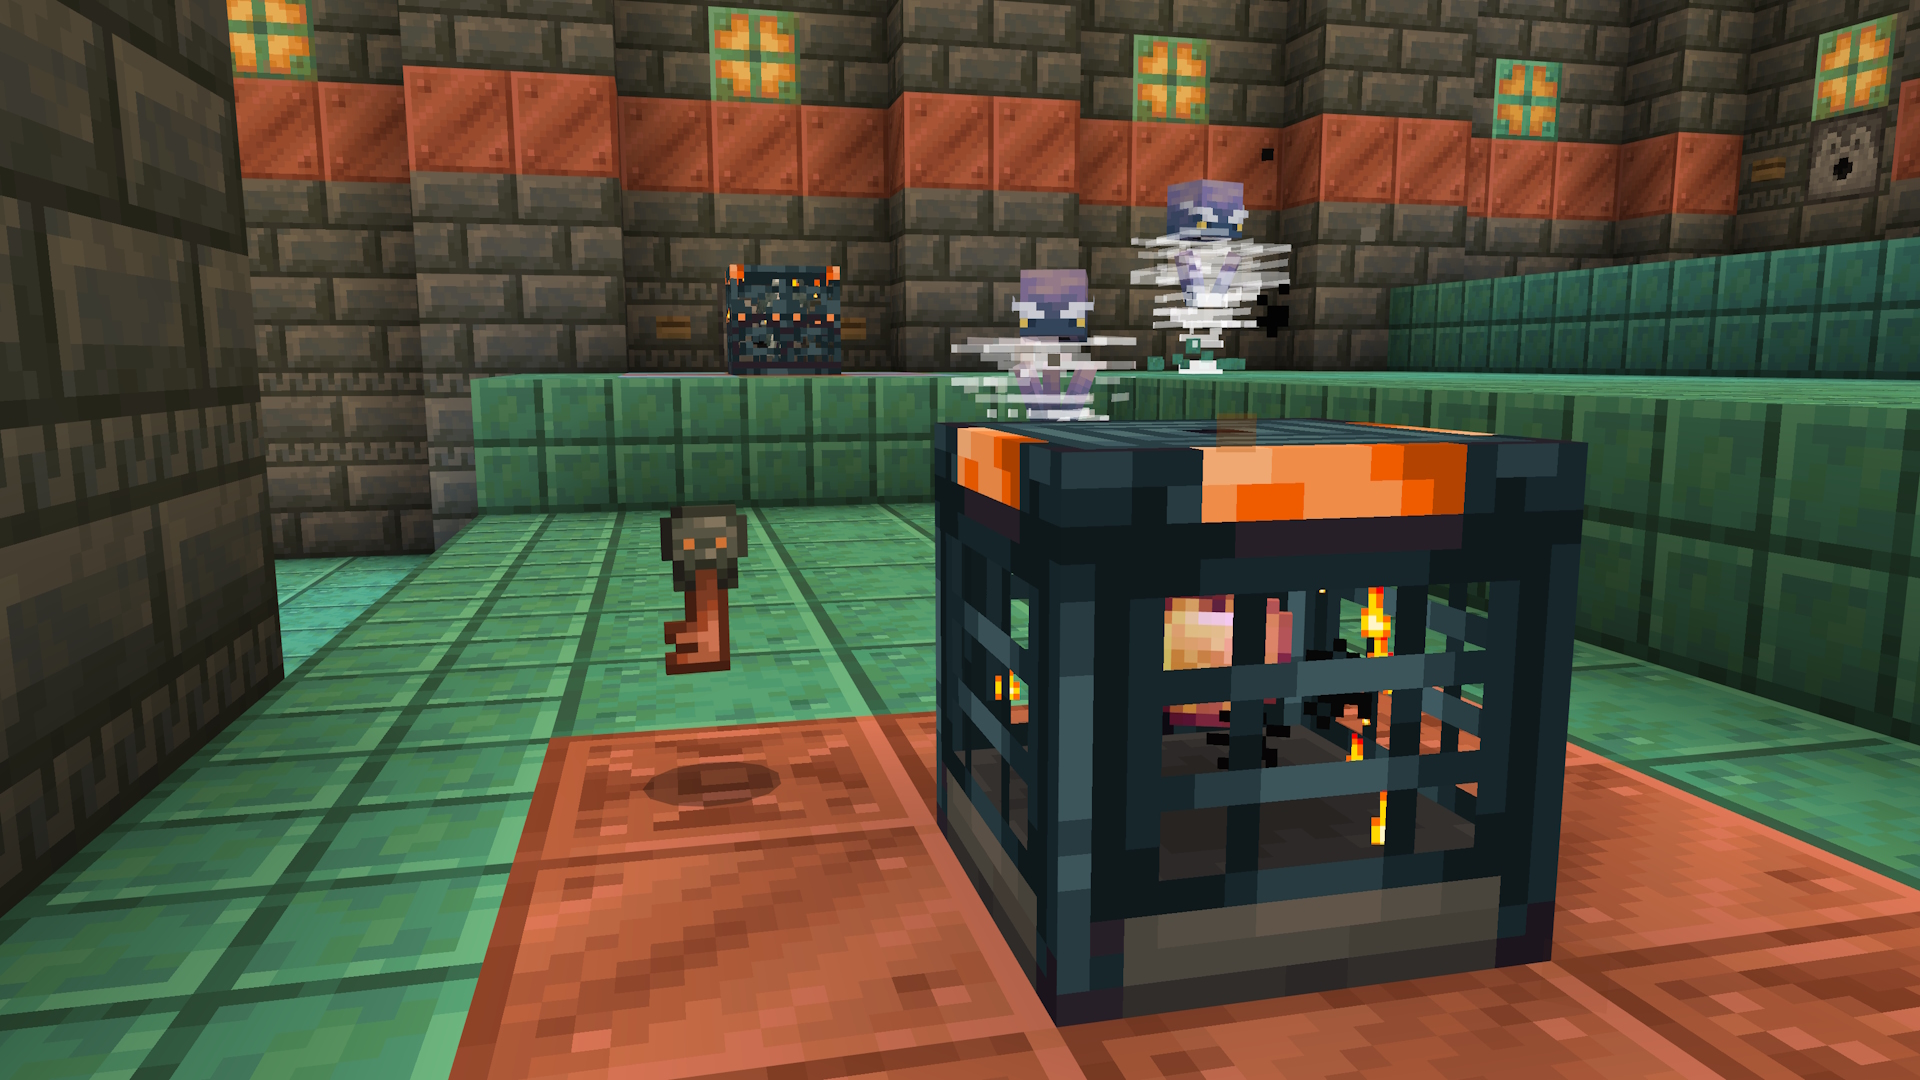 A Minecraft scene of a trial chamber. There is a vault block in the front, with a trial key beside it. In the background are two breeze mobs.